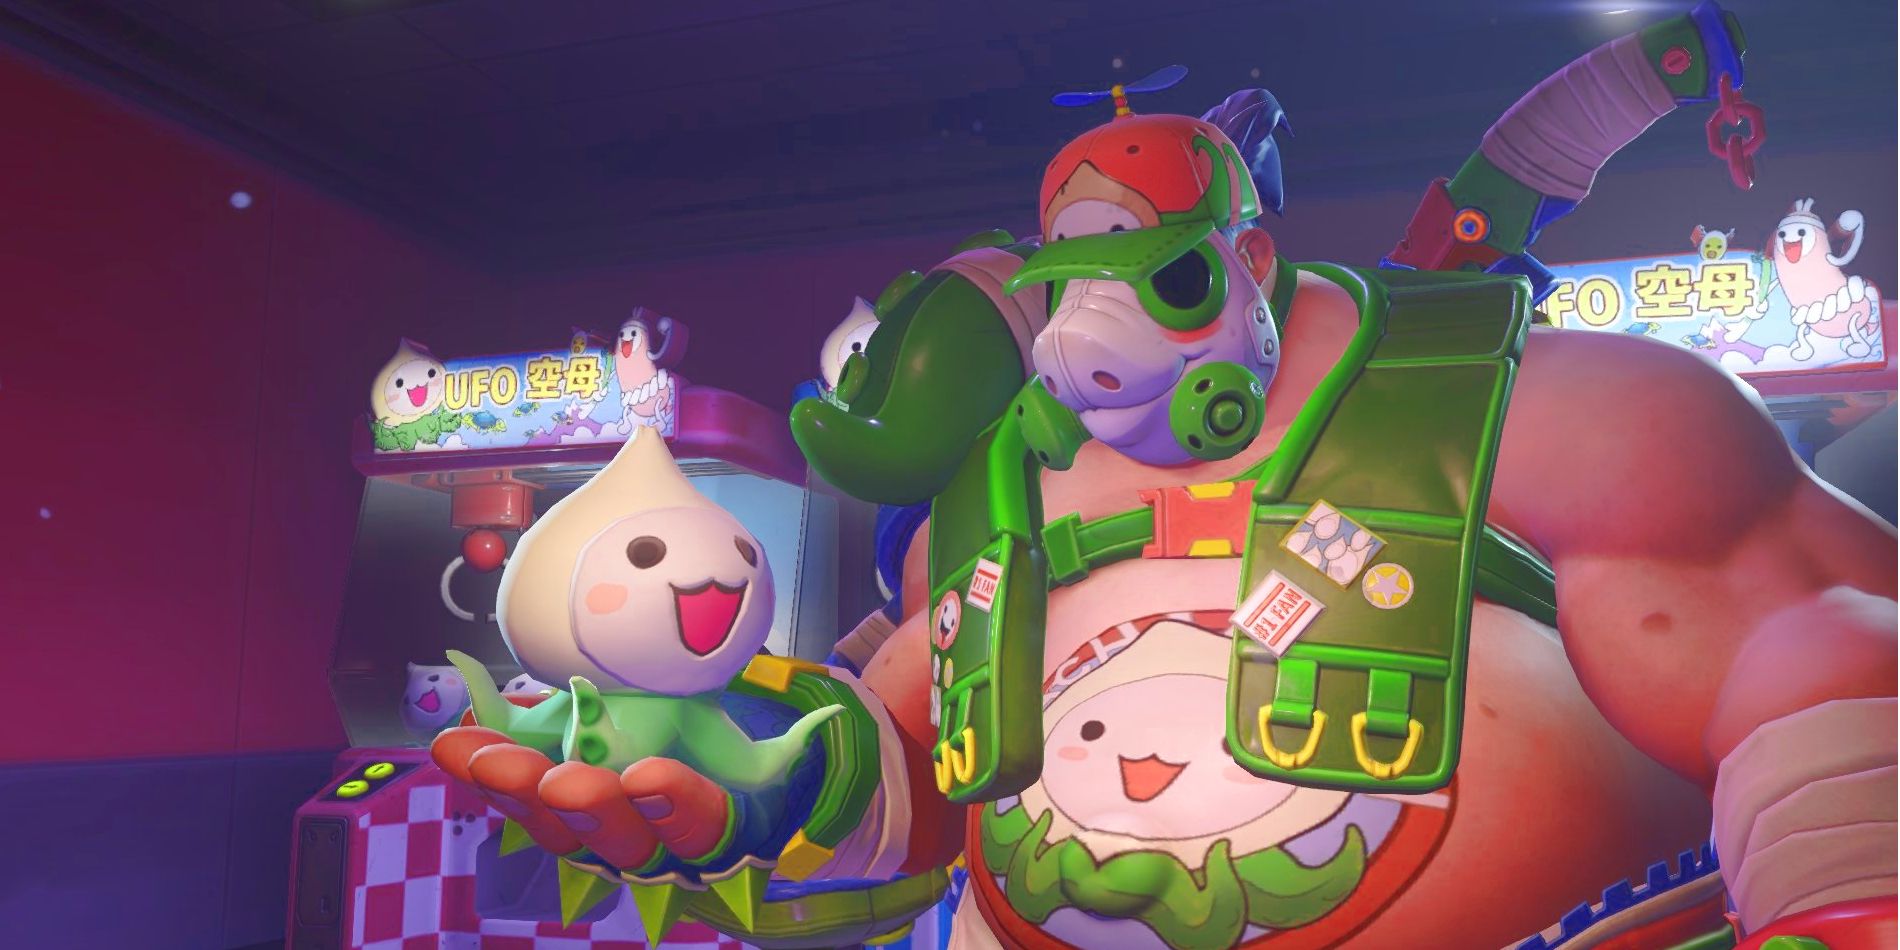 Image shows the Overwatch character Roadhog in his Pachimari skin while holding a large plush of a Pachimari.